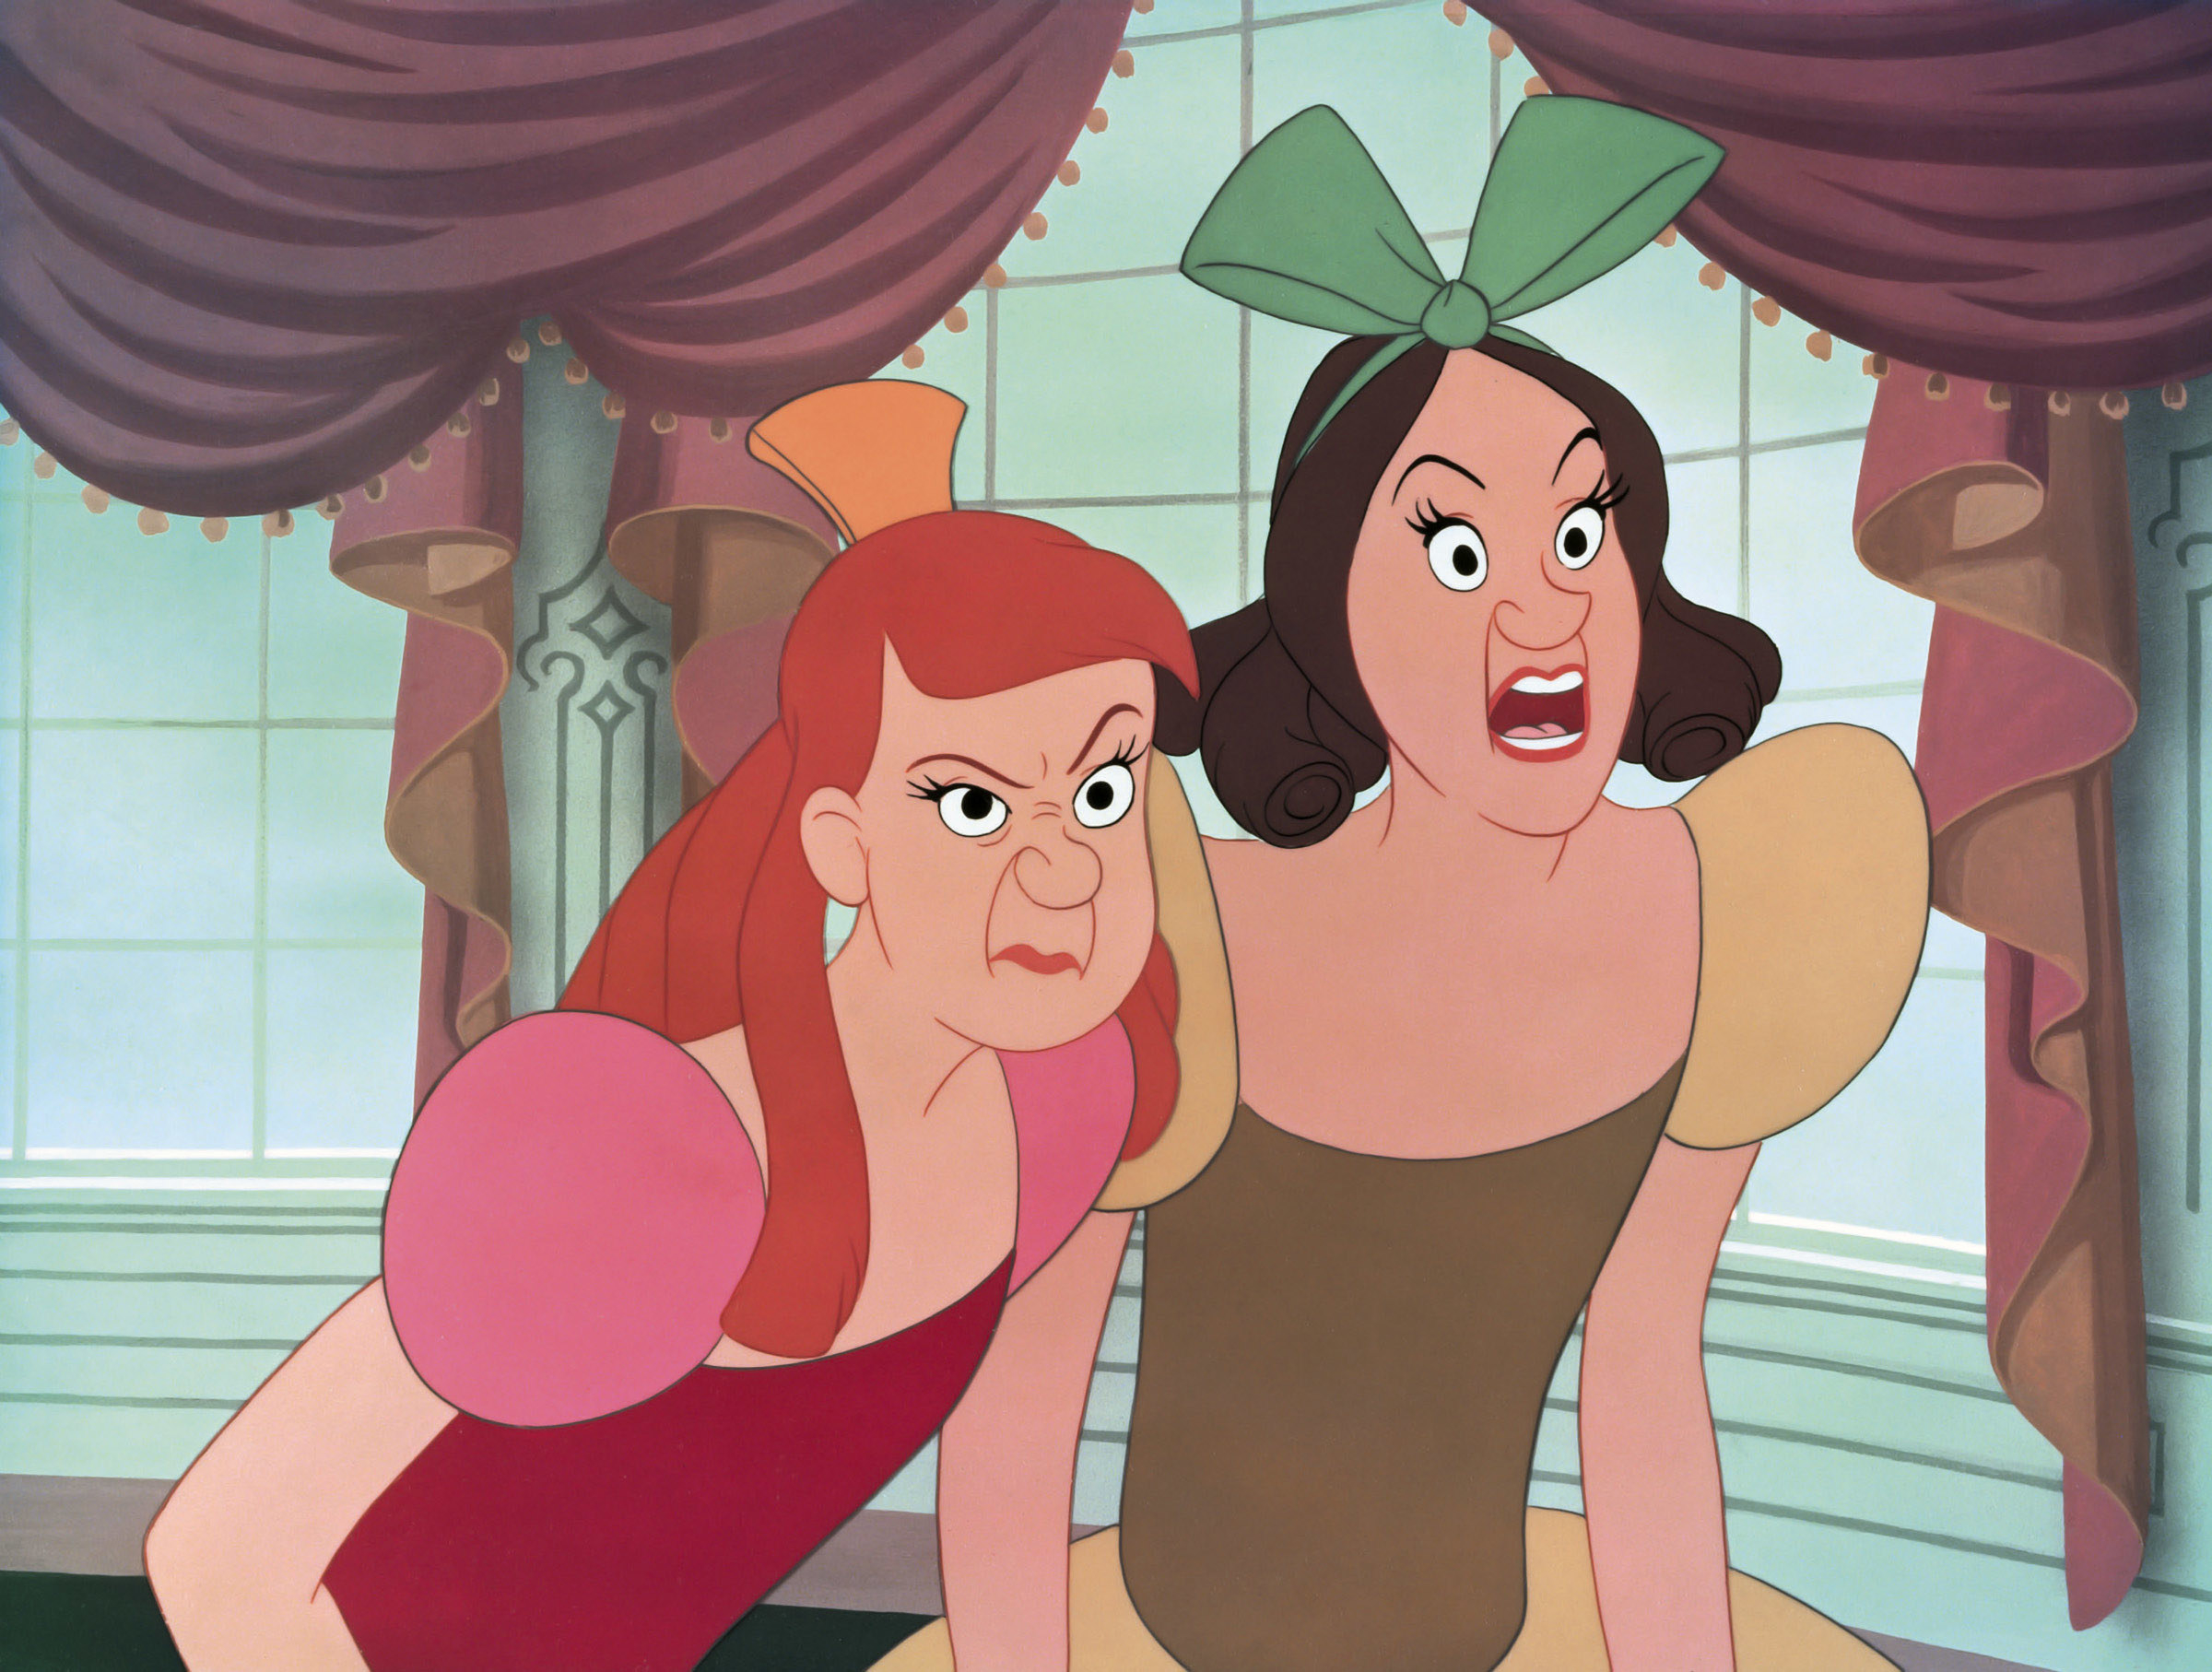 Anastasia and Drizella in the animated version of Cinderella